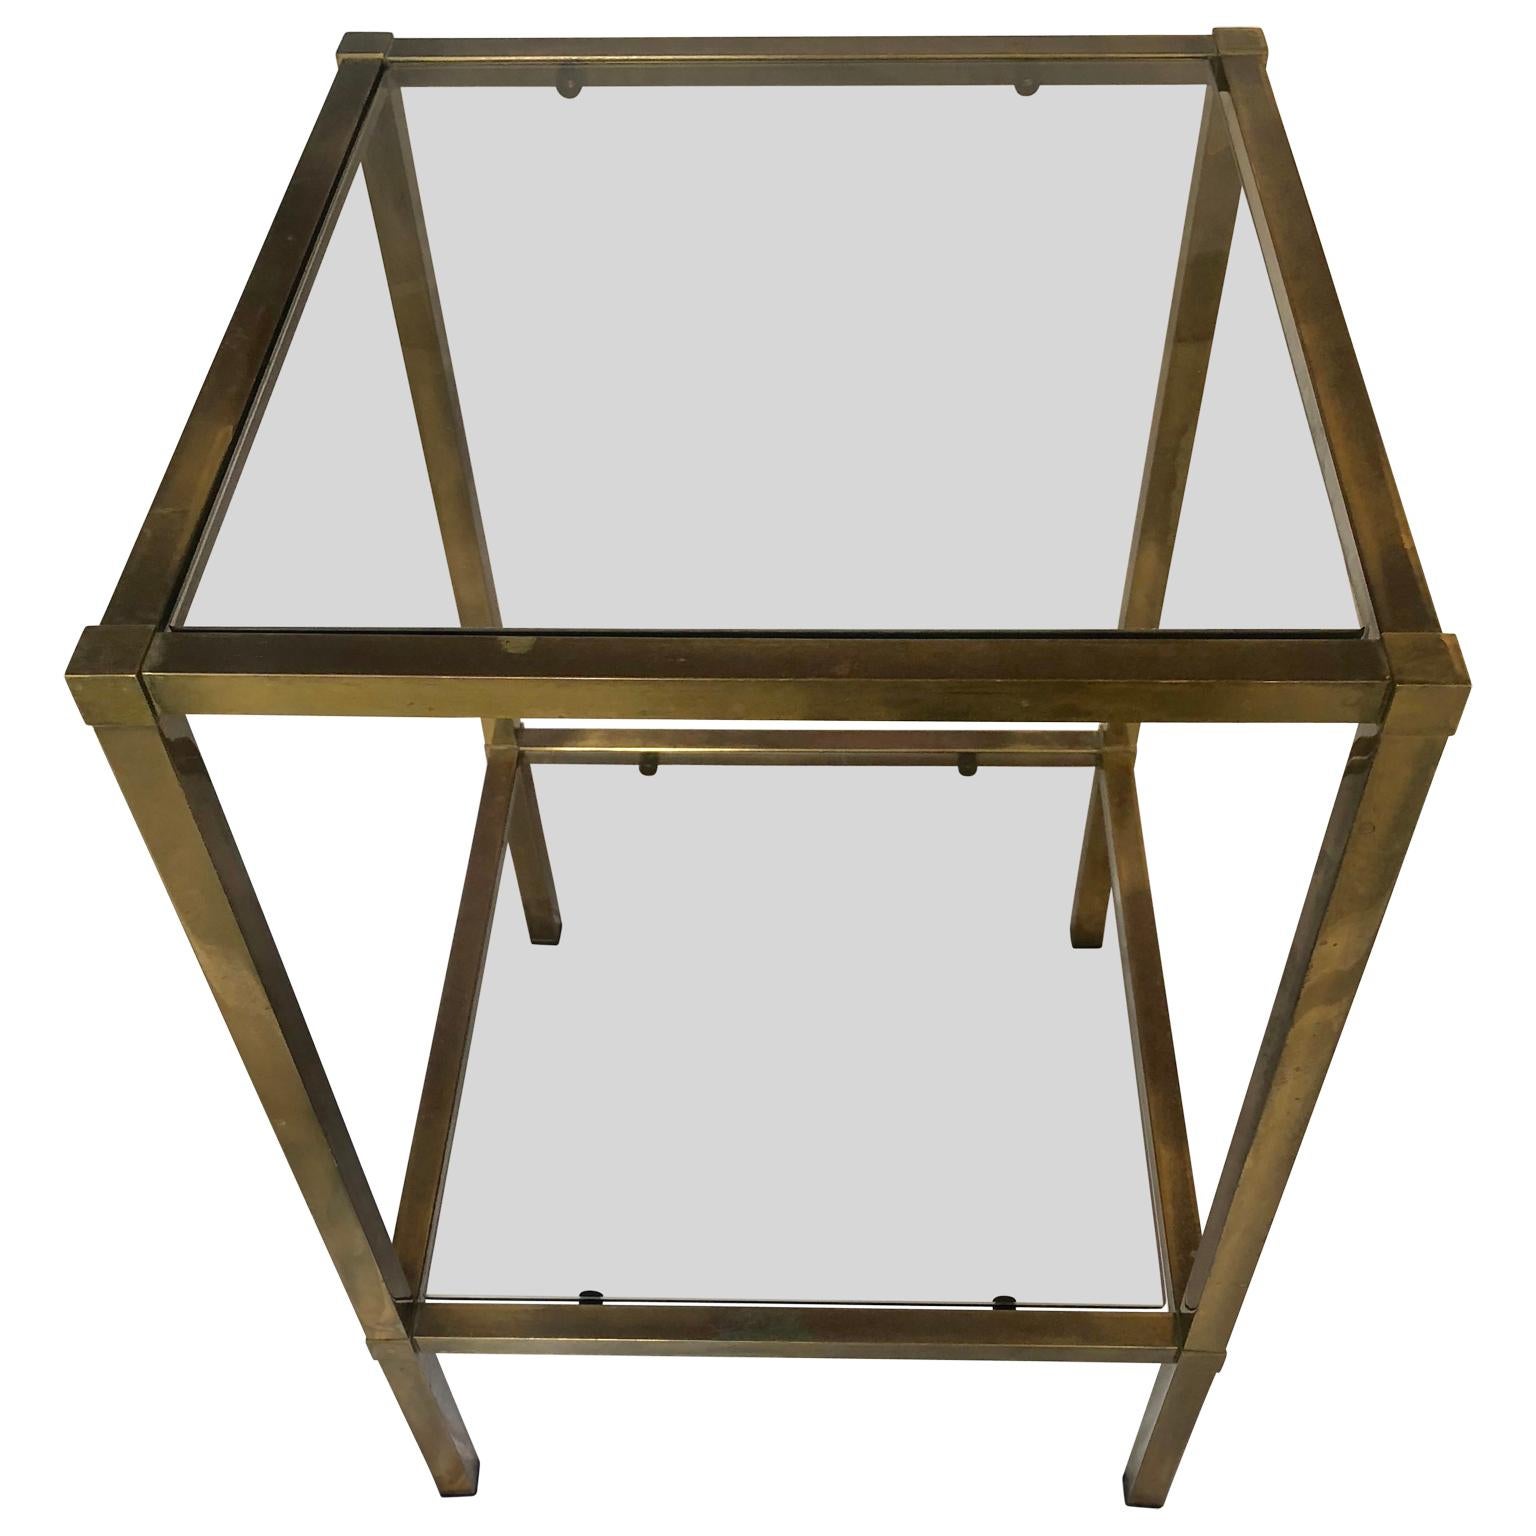 Gilt Small Square Italian Brass Glass-Top Mid-Century Modern Side Table